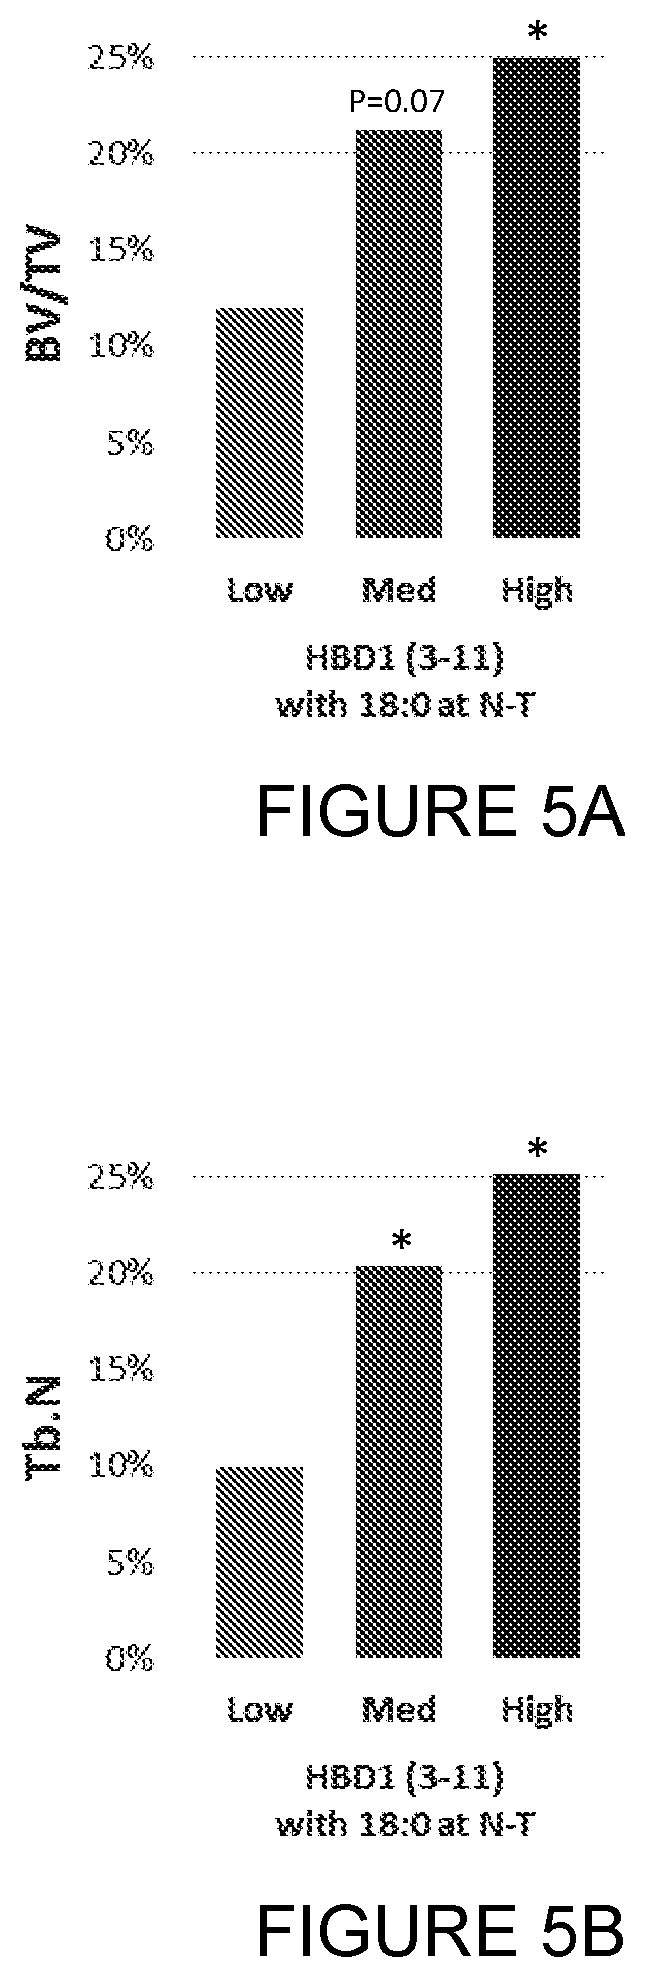 Compounds, compositions and uses thereof for improvement of bone disorders